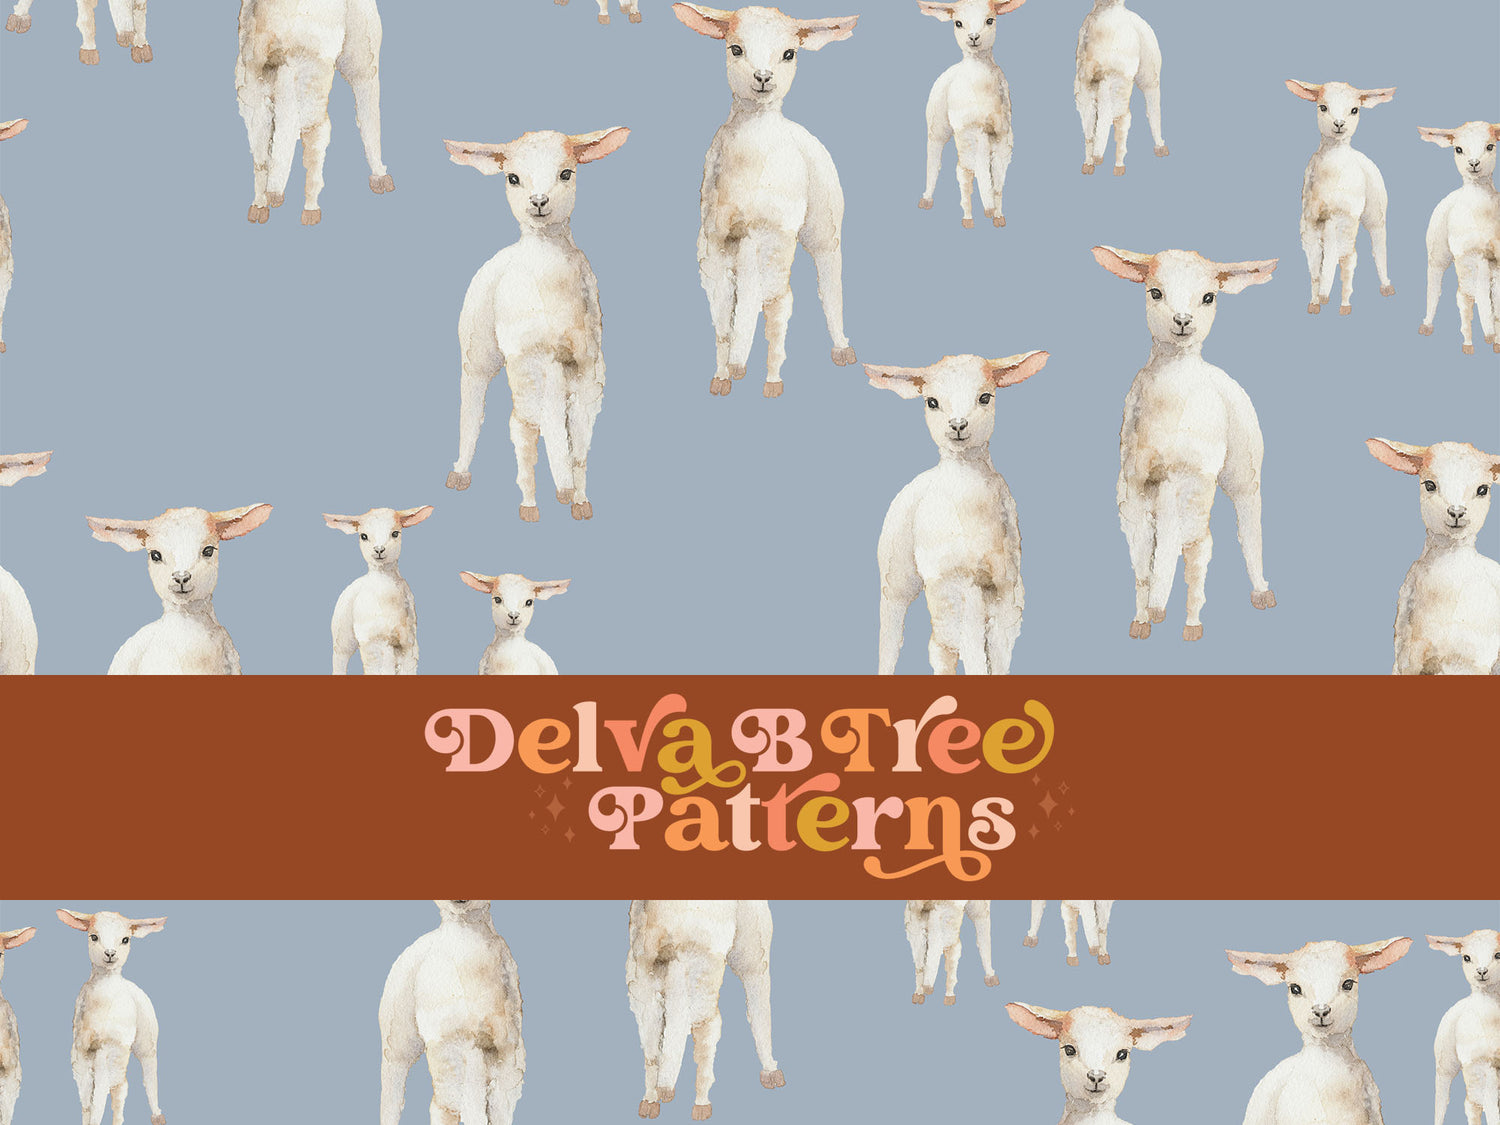 Watercolor lambs on a cadet blue background seamless file for fabric printing. Retro look Baby Sheep Repeat Pattern for textiles, polymailers, baby boy lovey blankets, nursery crib bedding, kids clothing, girls hair accessories, home decor accents, pet products.